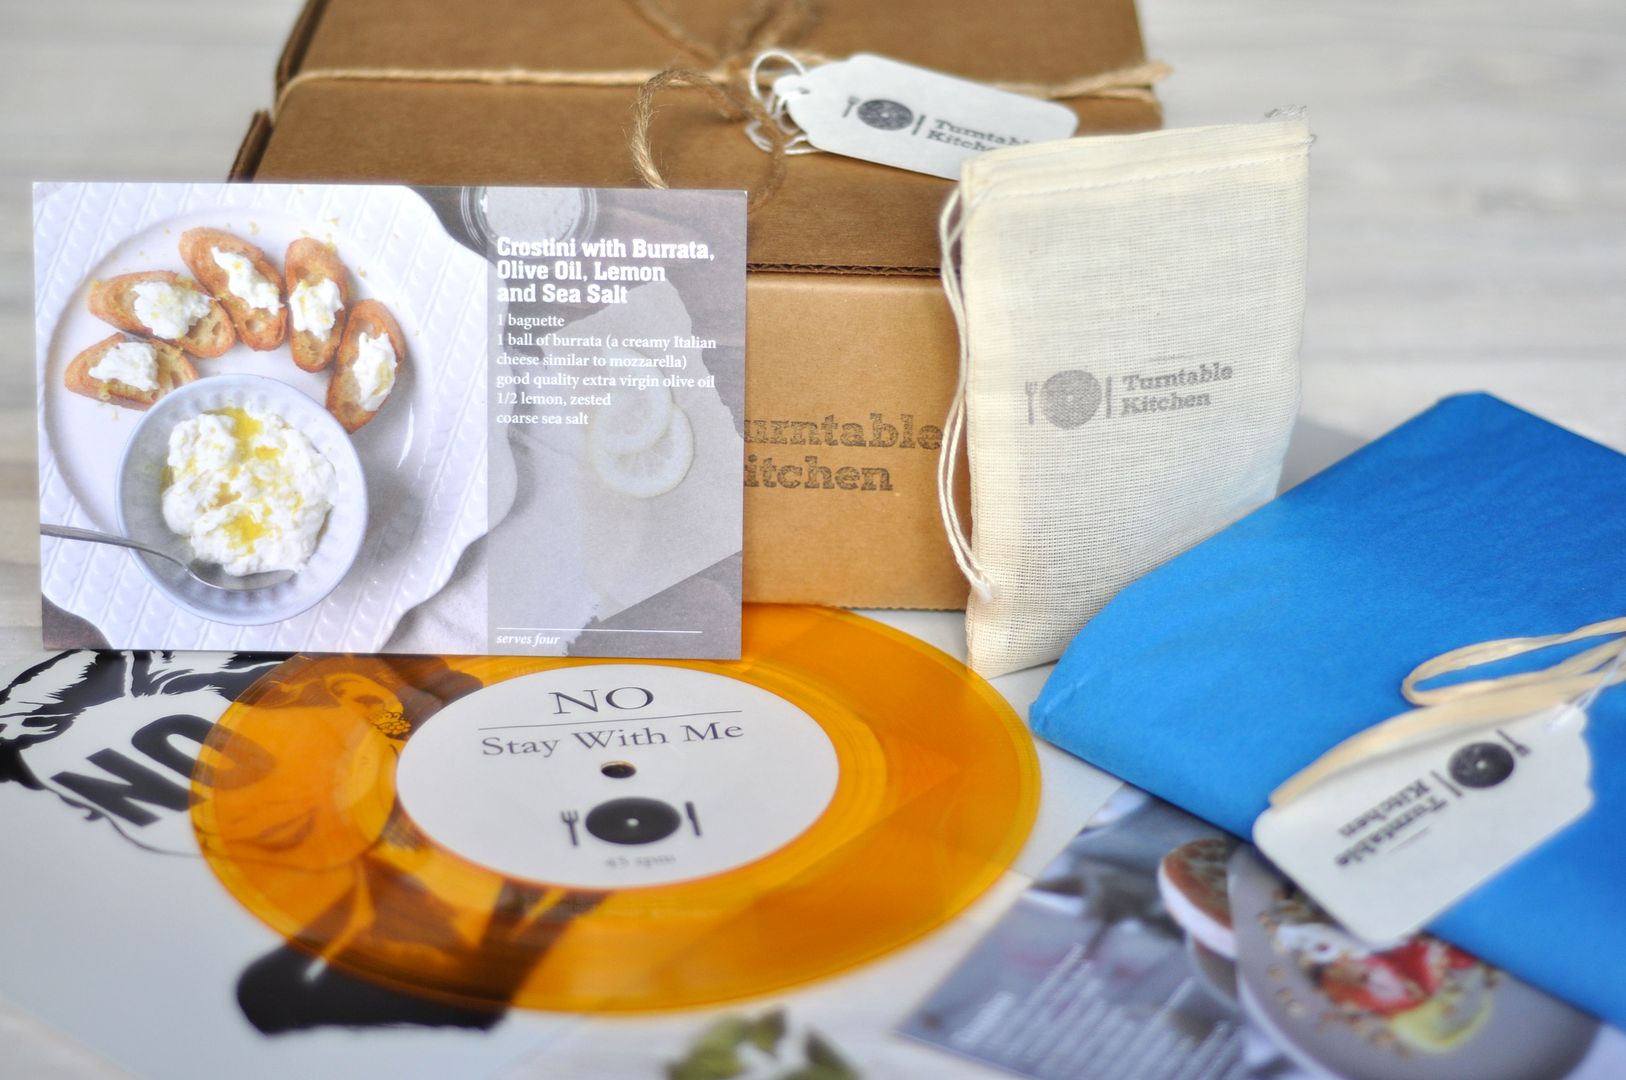 Gourmet Father's Day Gifts: Turntable Kitchen Pairing Box